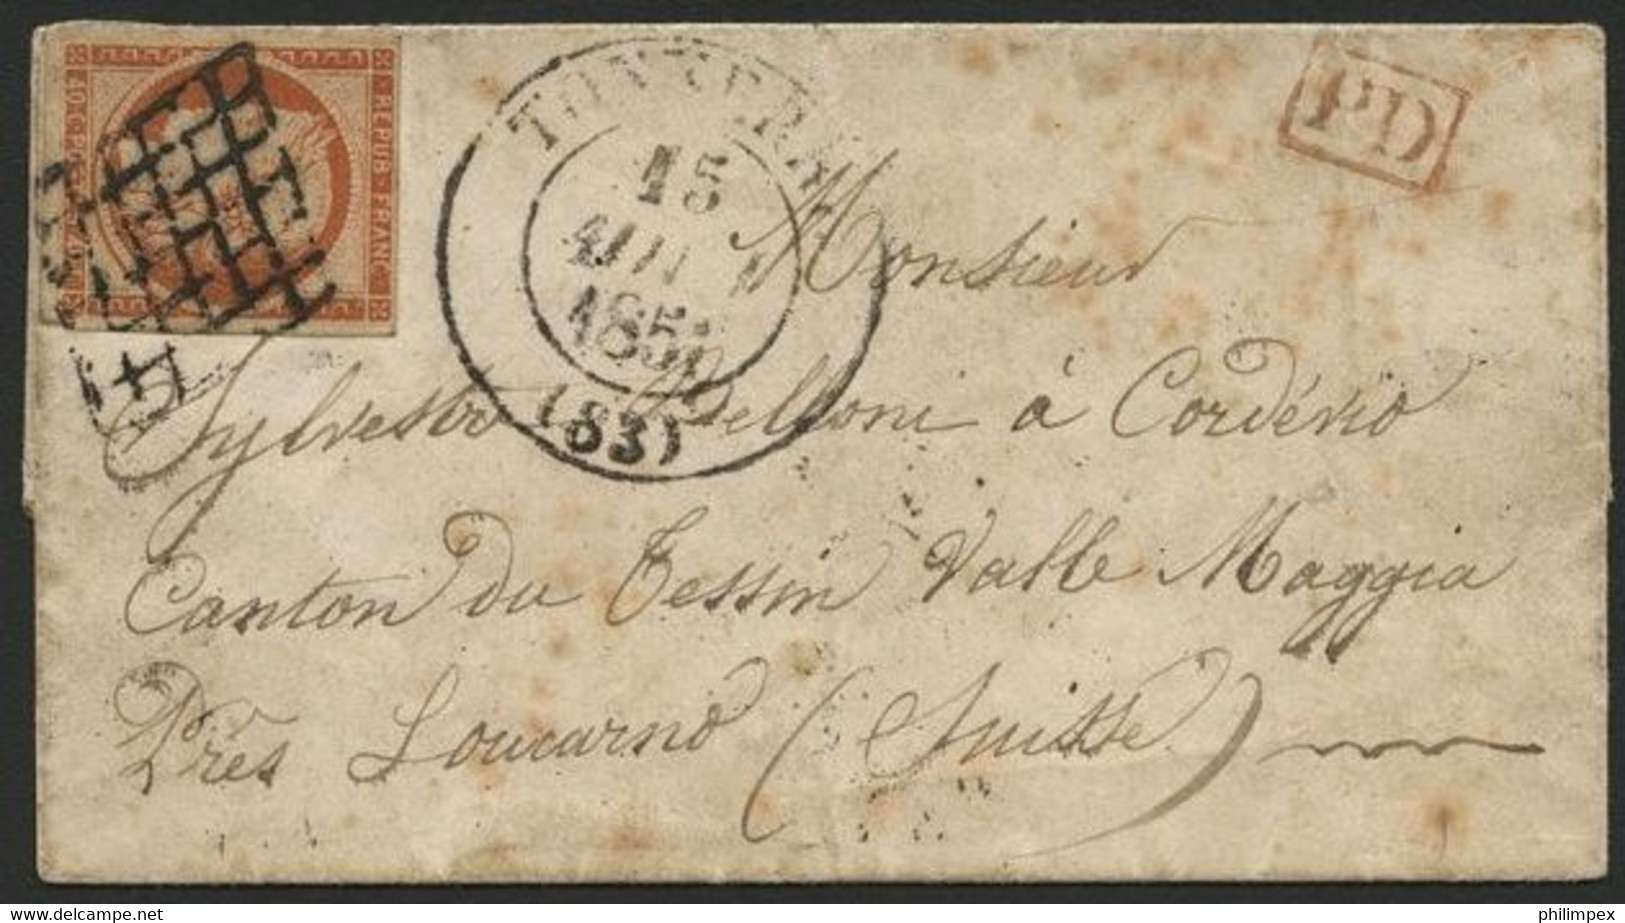 FRANCE, 40 CENTIMES INTERESTING LETTER FROM TONNERRE TO CODERIO 1851 - RARE USE ABROAD! - 1849-1850 Cérès